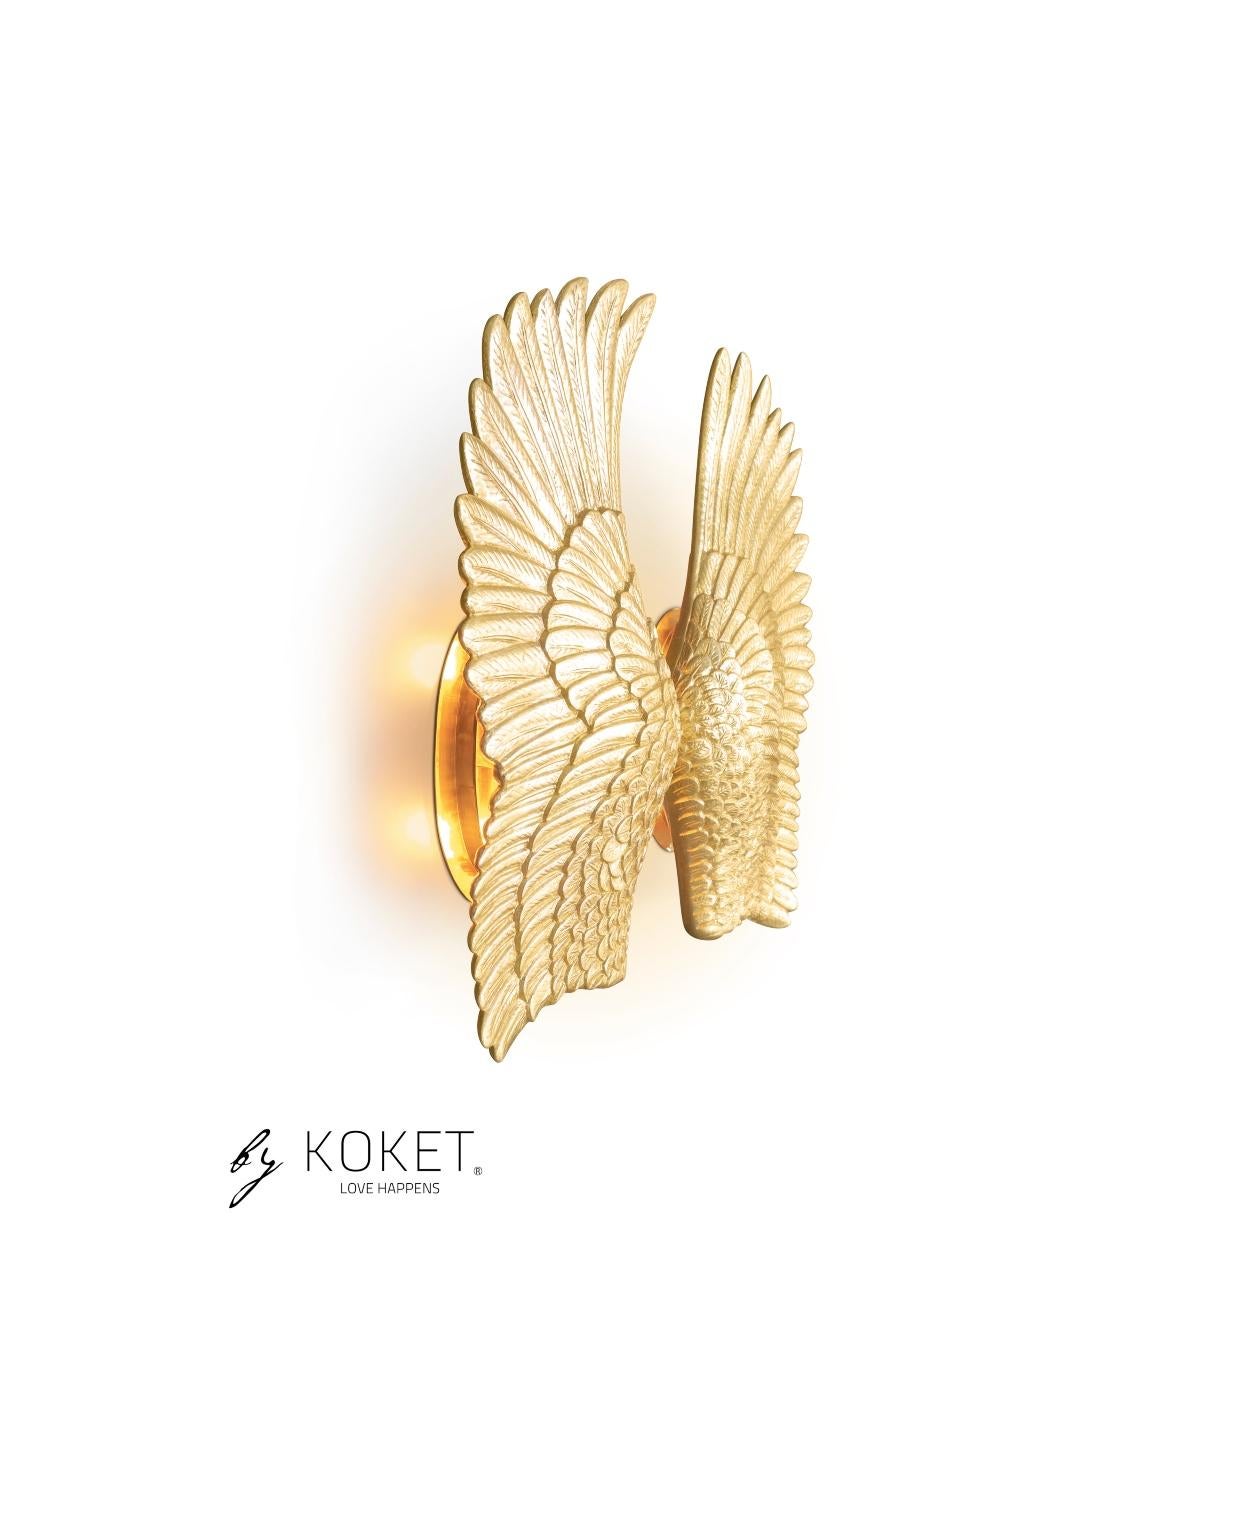 “Your wings already exist, all you have to do is fly!” Bring strength, freedom, love and protective power to your interior with the charmingly angelic Pluma sconce.

Structure: Gold leaf with high gloss finish
Details: Polished brass high gloss